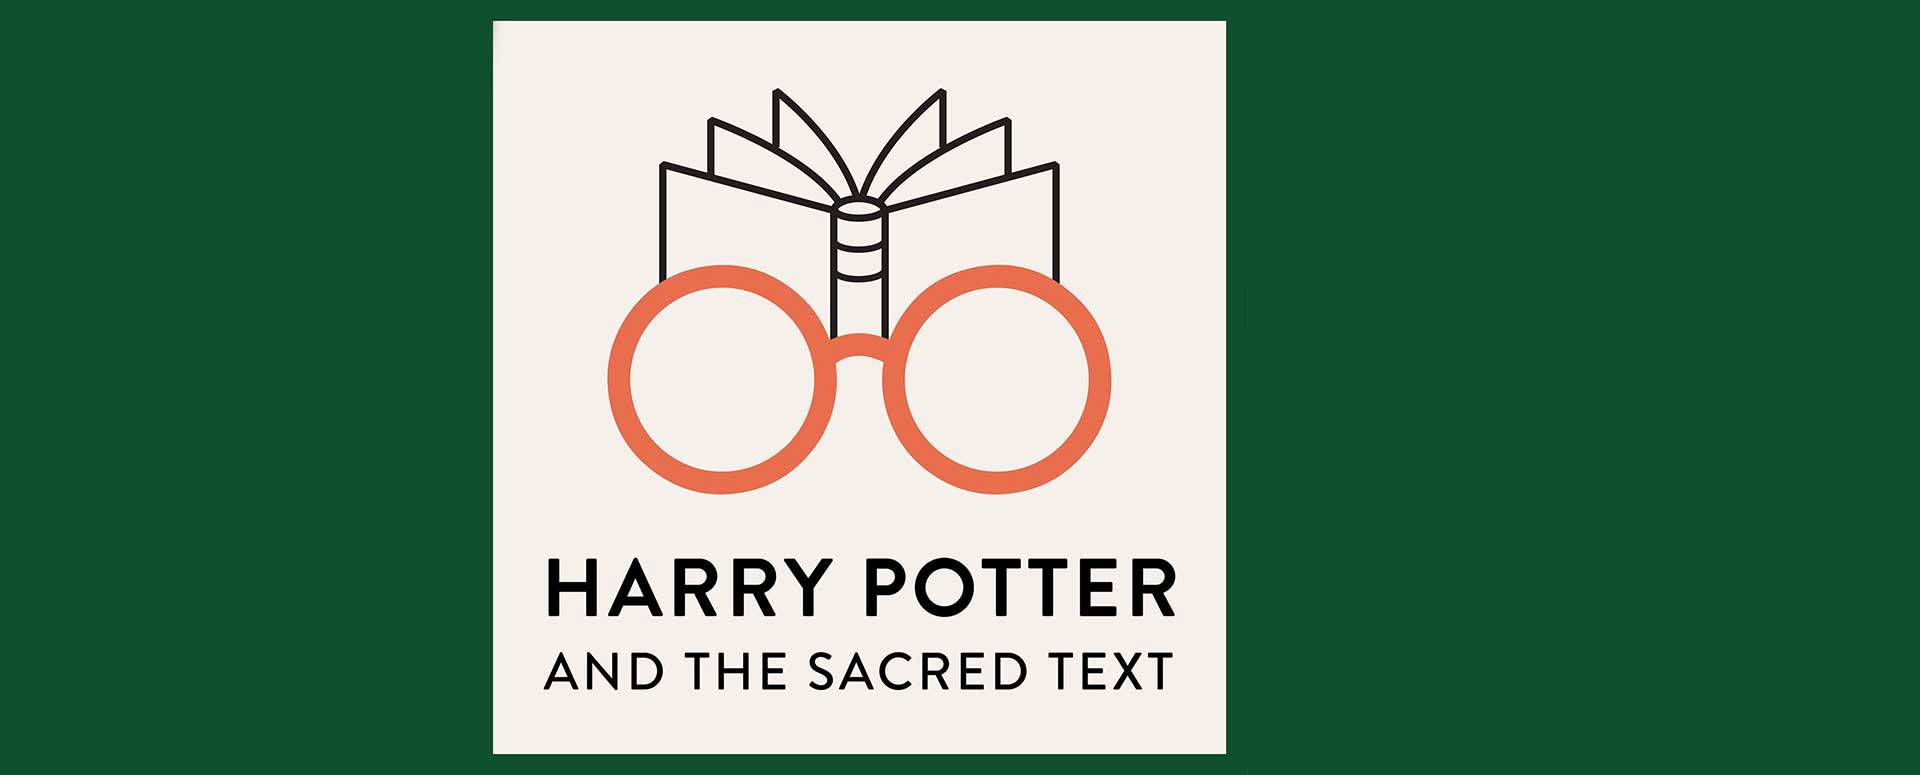 Harry Potter and the Sacred Text  